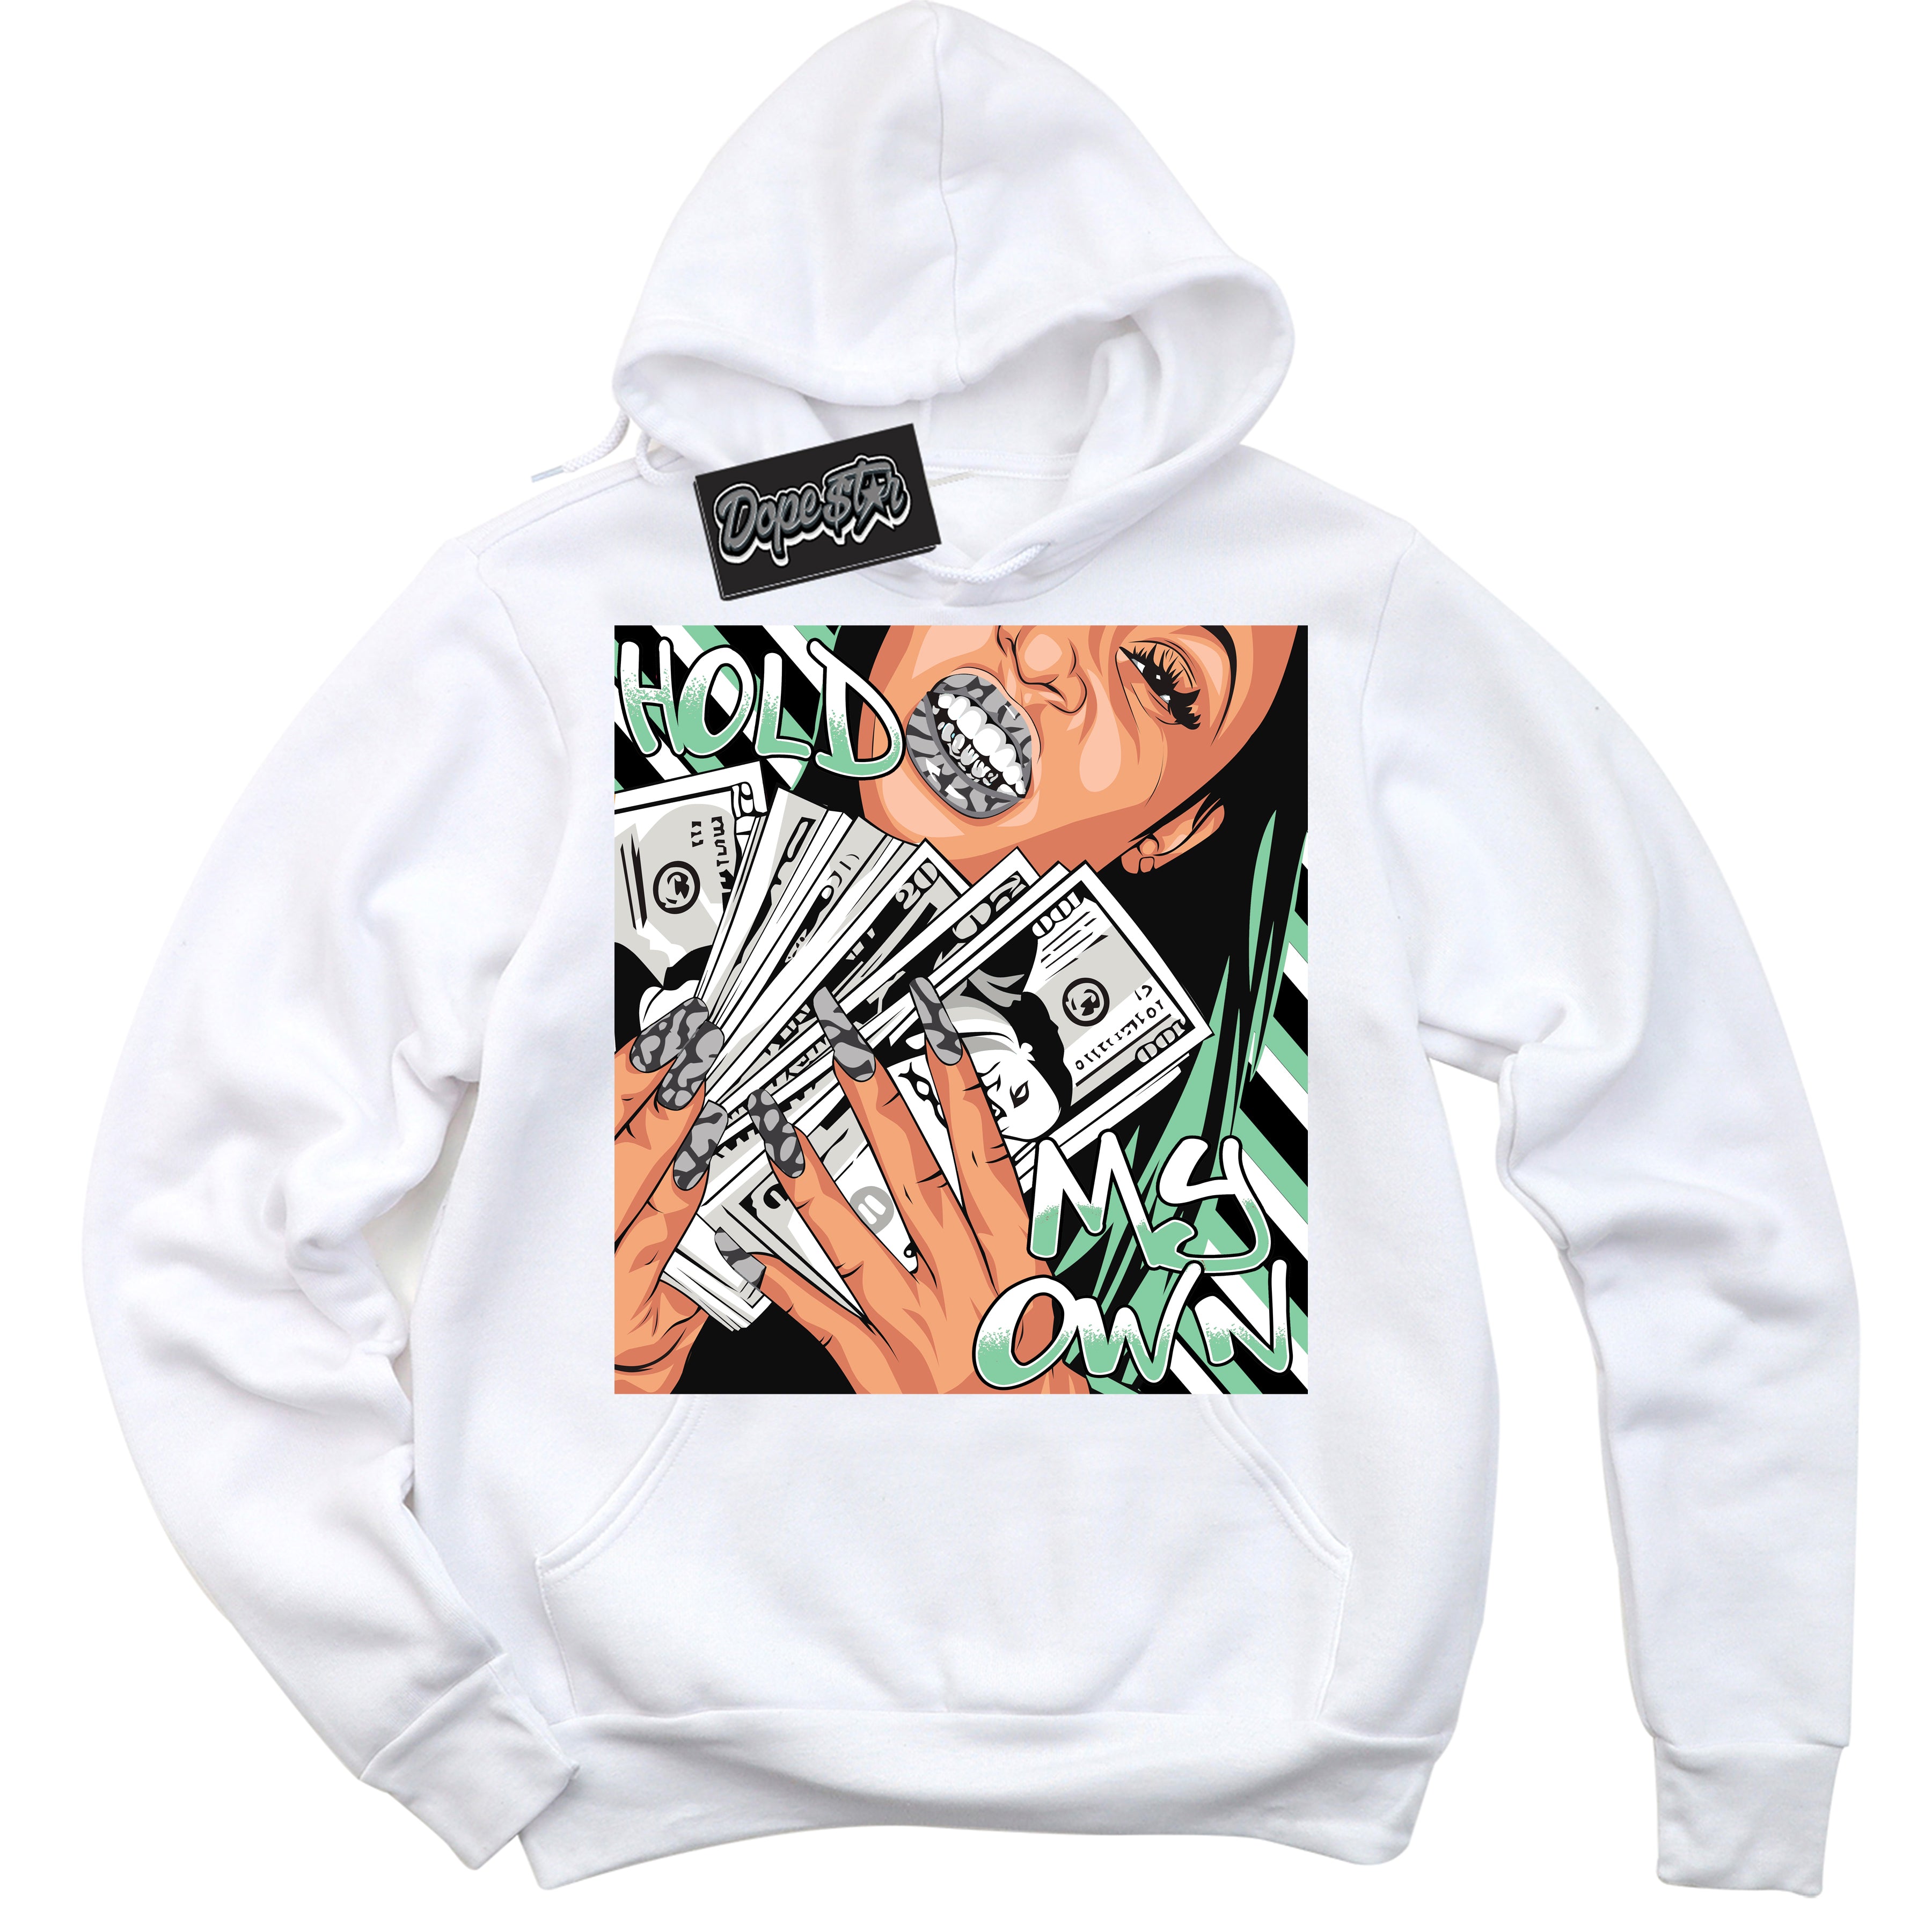 Cool White Graphic DopeStar Hoodie with “ Hold My Own “ print, that perfectly matches Green Glow 3s sneakers